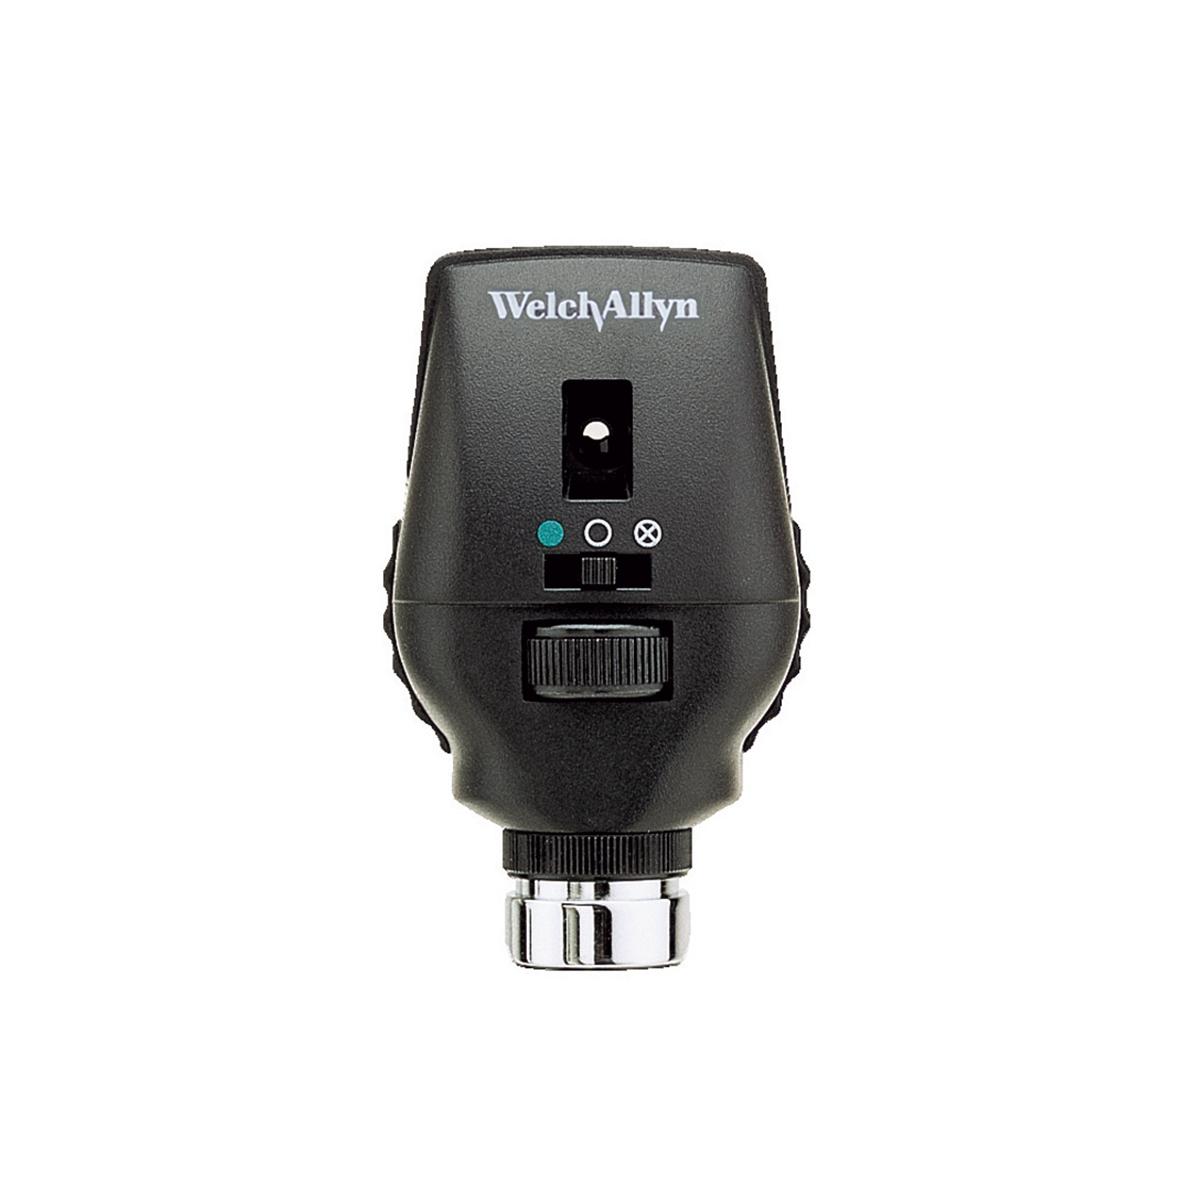 Welch Allyn 3.5 V SureColor LED Coaxial Ophthalmoscope HEAD ONLY Welch Allyn